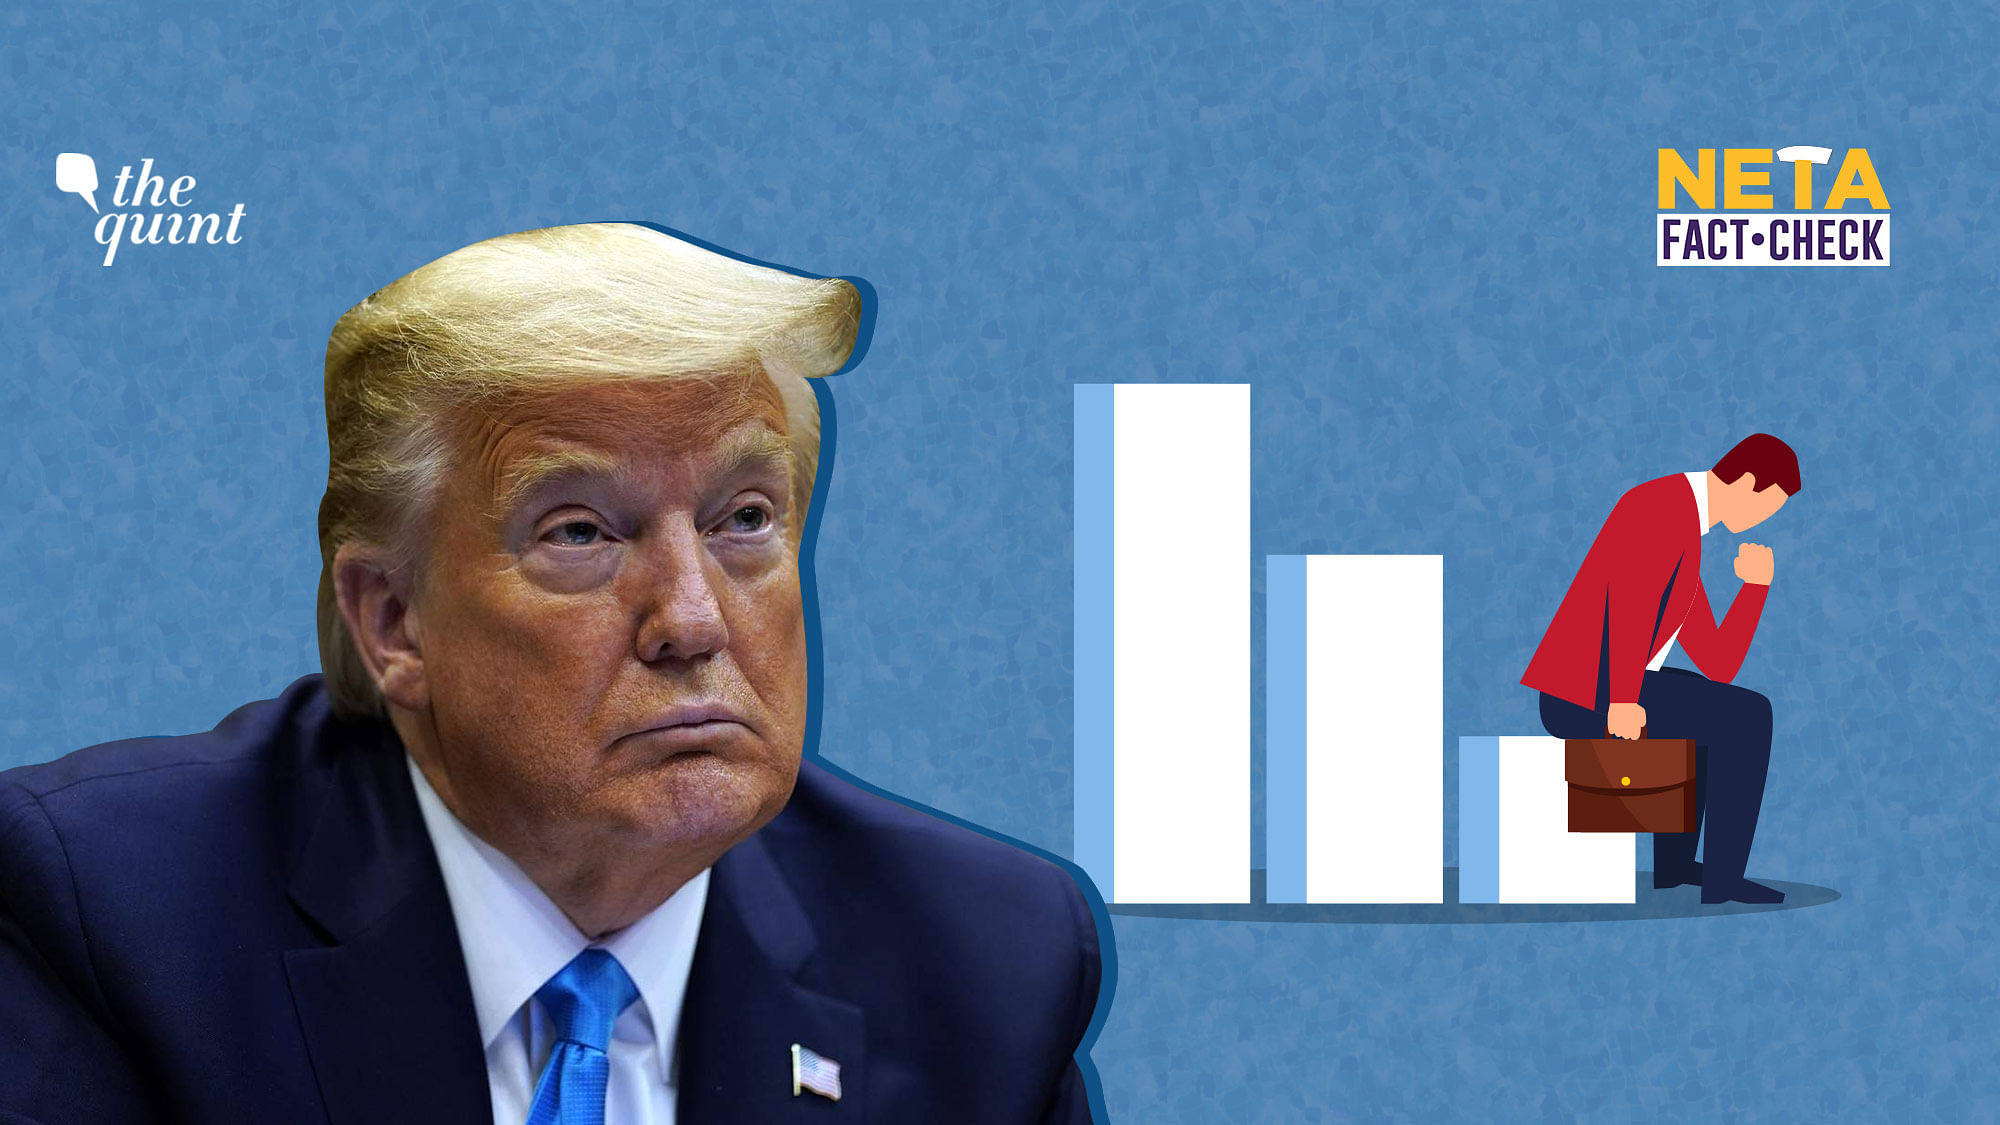 On 7 September, Trump tweeted that 10.6 million jobs had been created in four months, adding that it was a record.